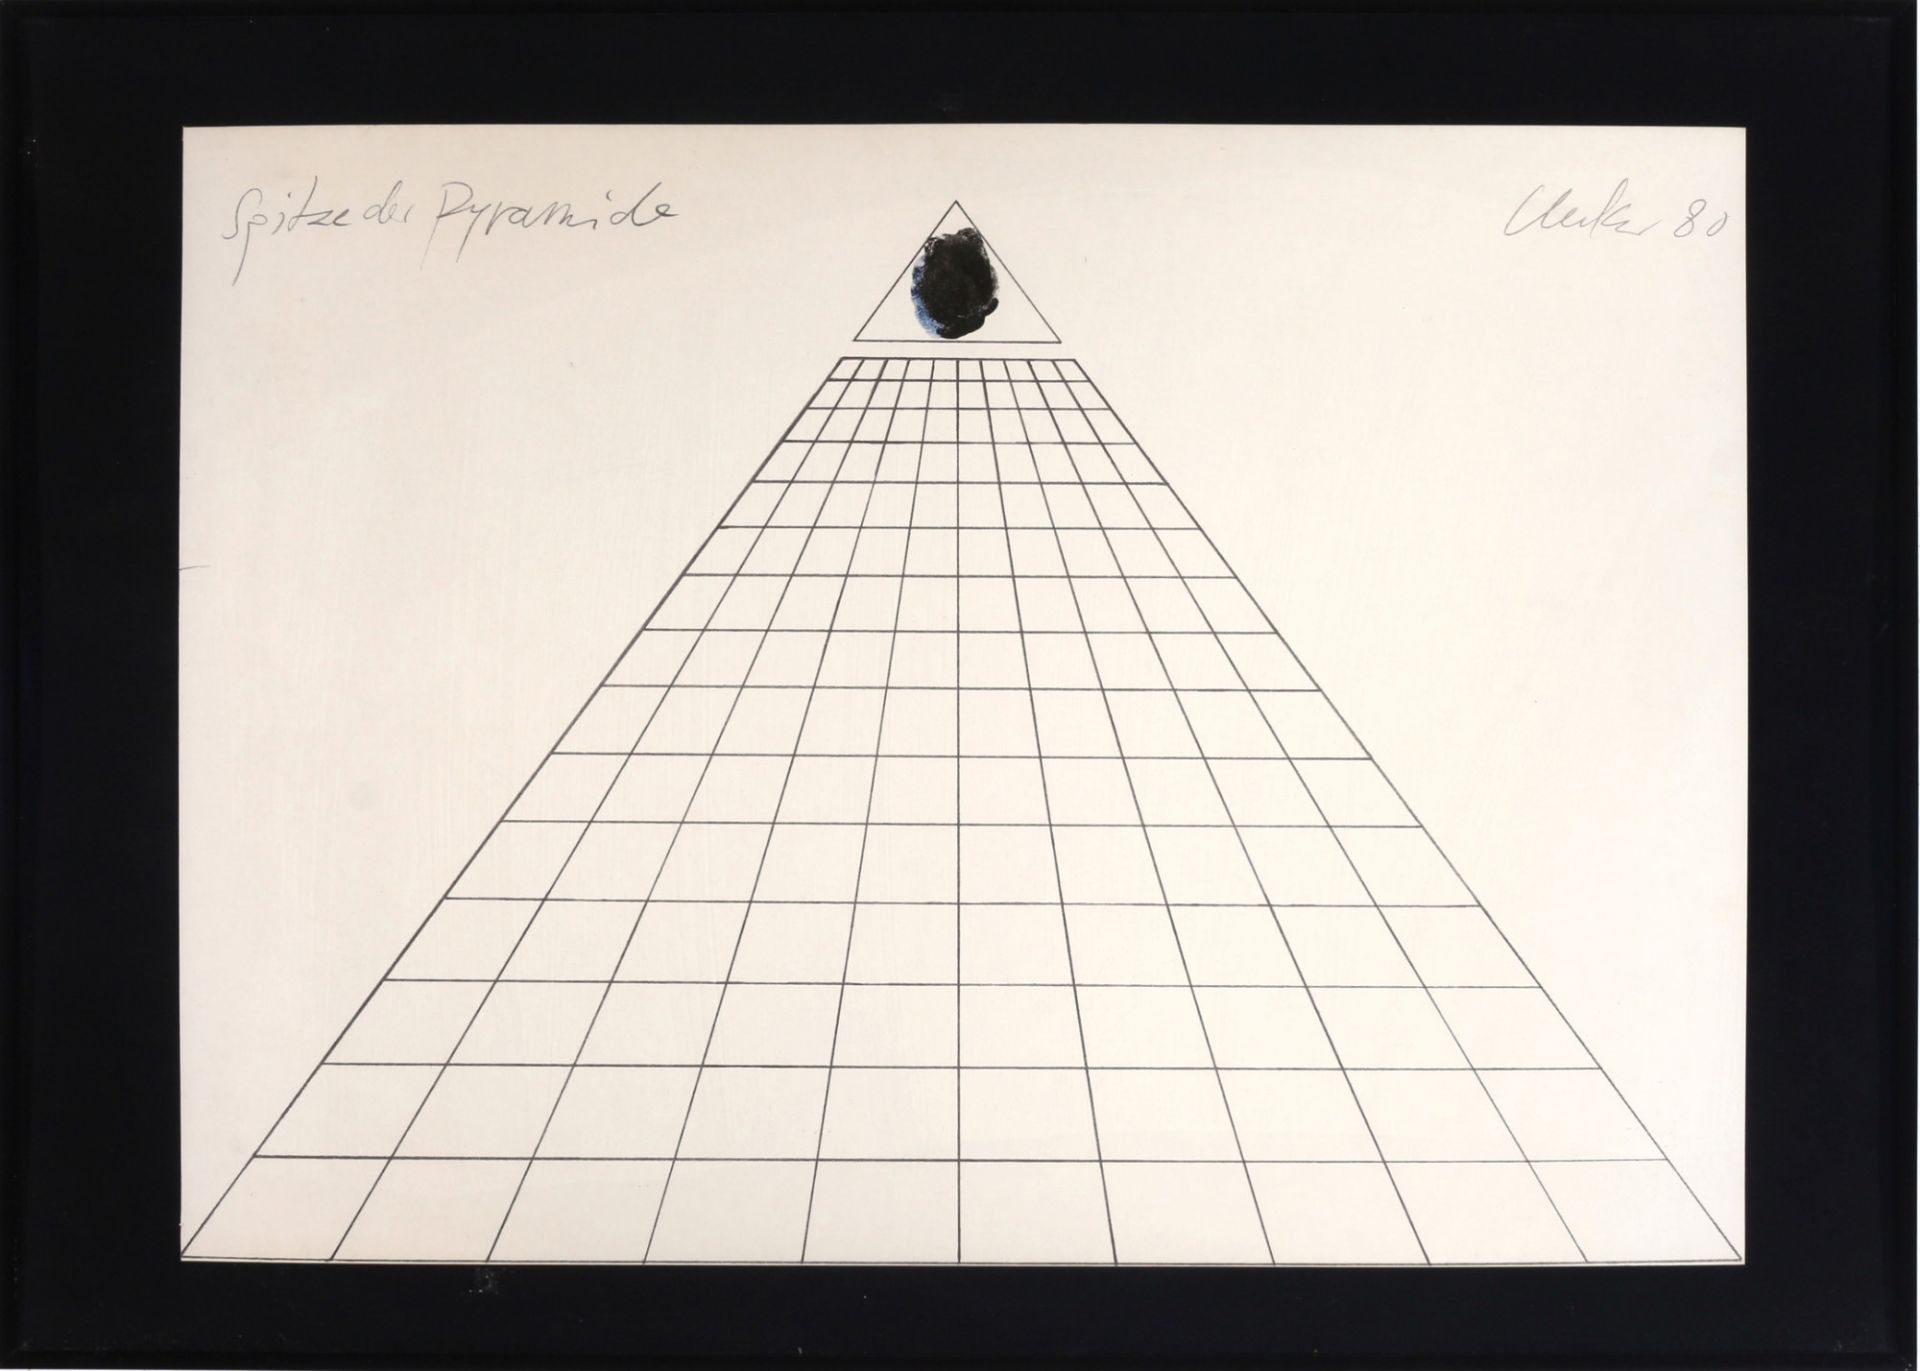 Günther Uecker (1930) lithography top of the pyramid, Lithografie Spitze der Payramide, - Image 2 of 5